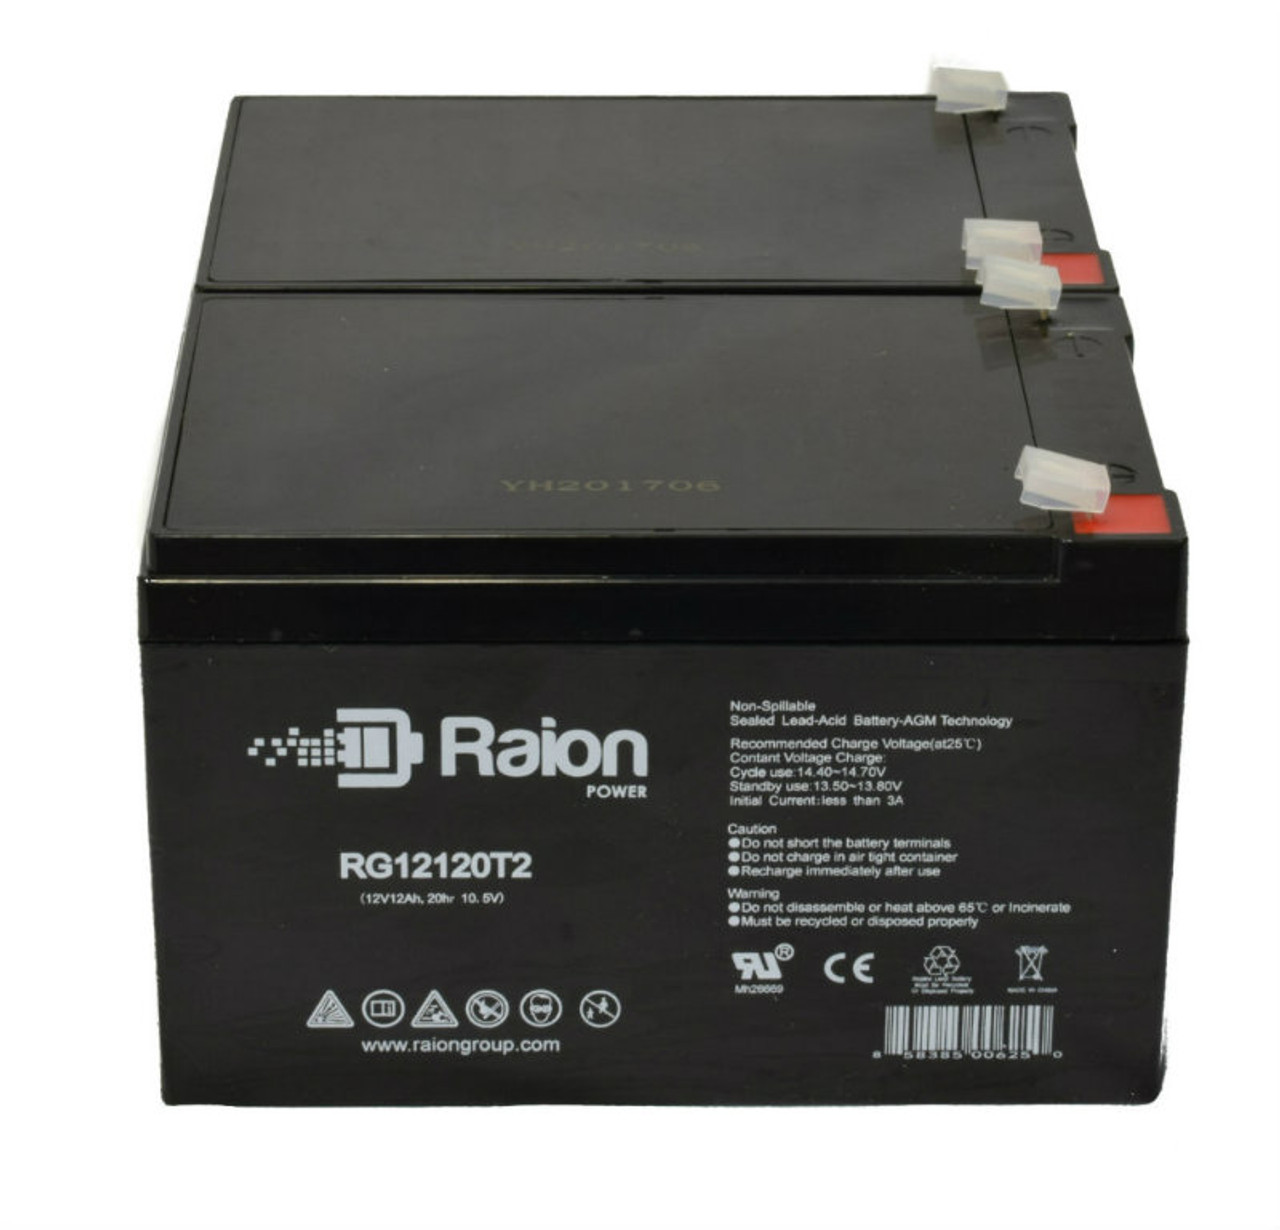 Raion Power 12V 12Ah Non-Spillable Compatible Replacement Battery for Gaston GT12-12HR - (2 Pack)